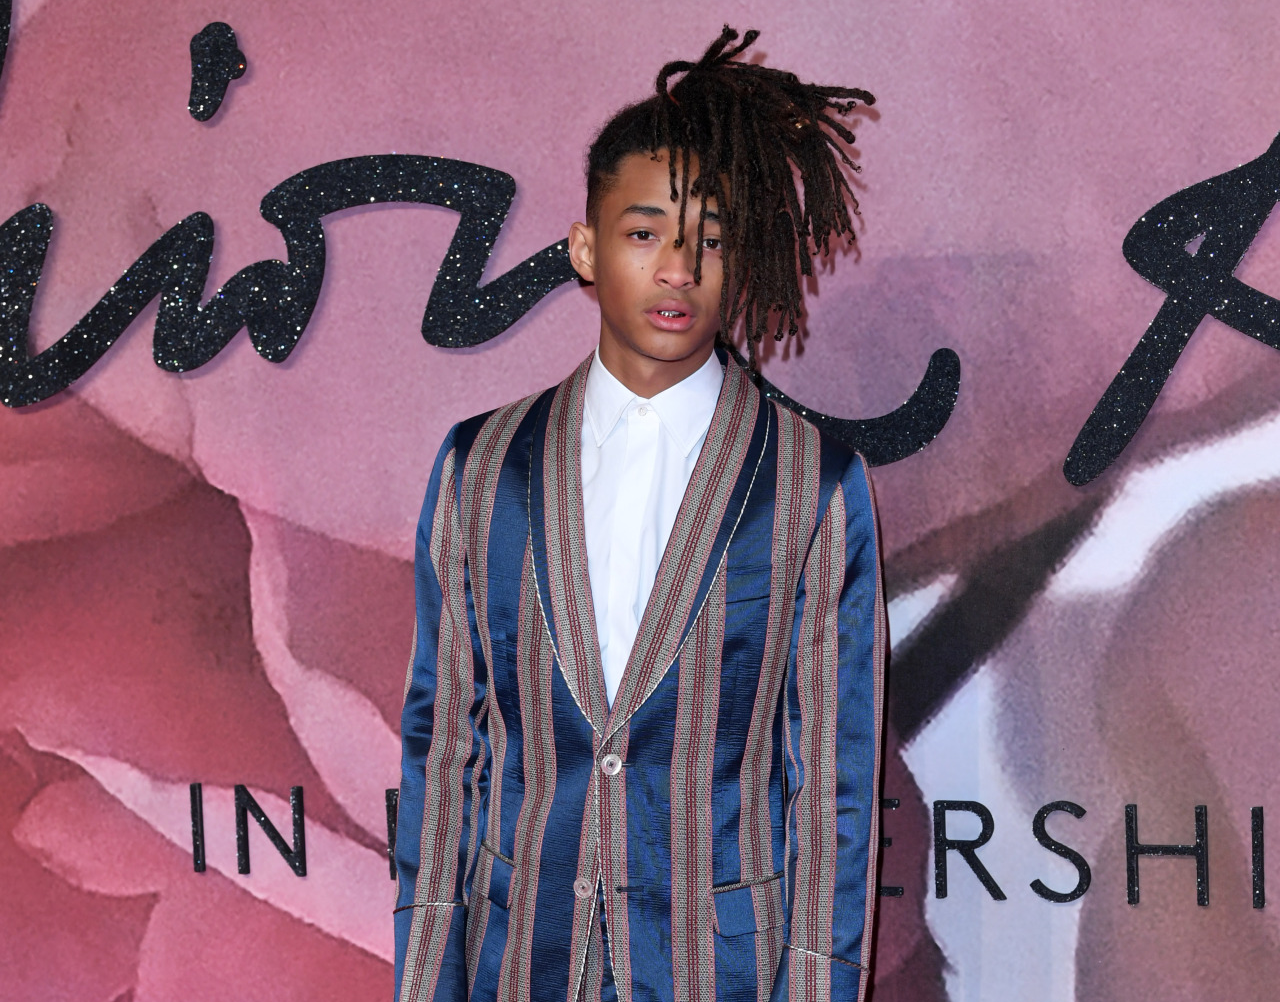 SPOTTED: Jaden Smith In Gucci At The 2016 British Fashion Awards